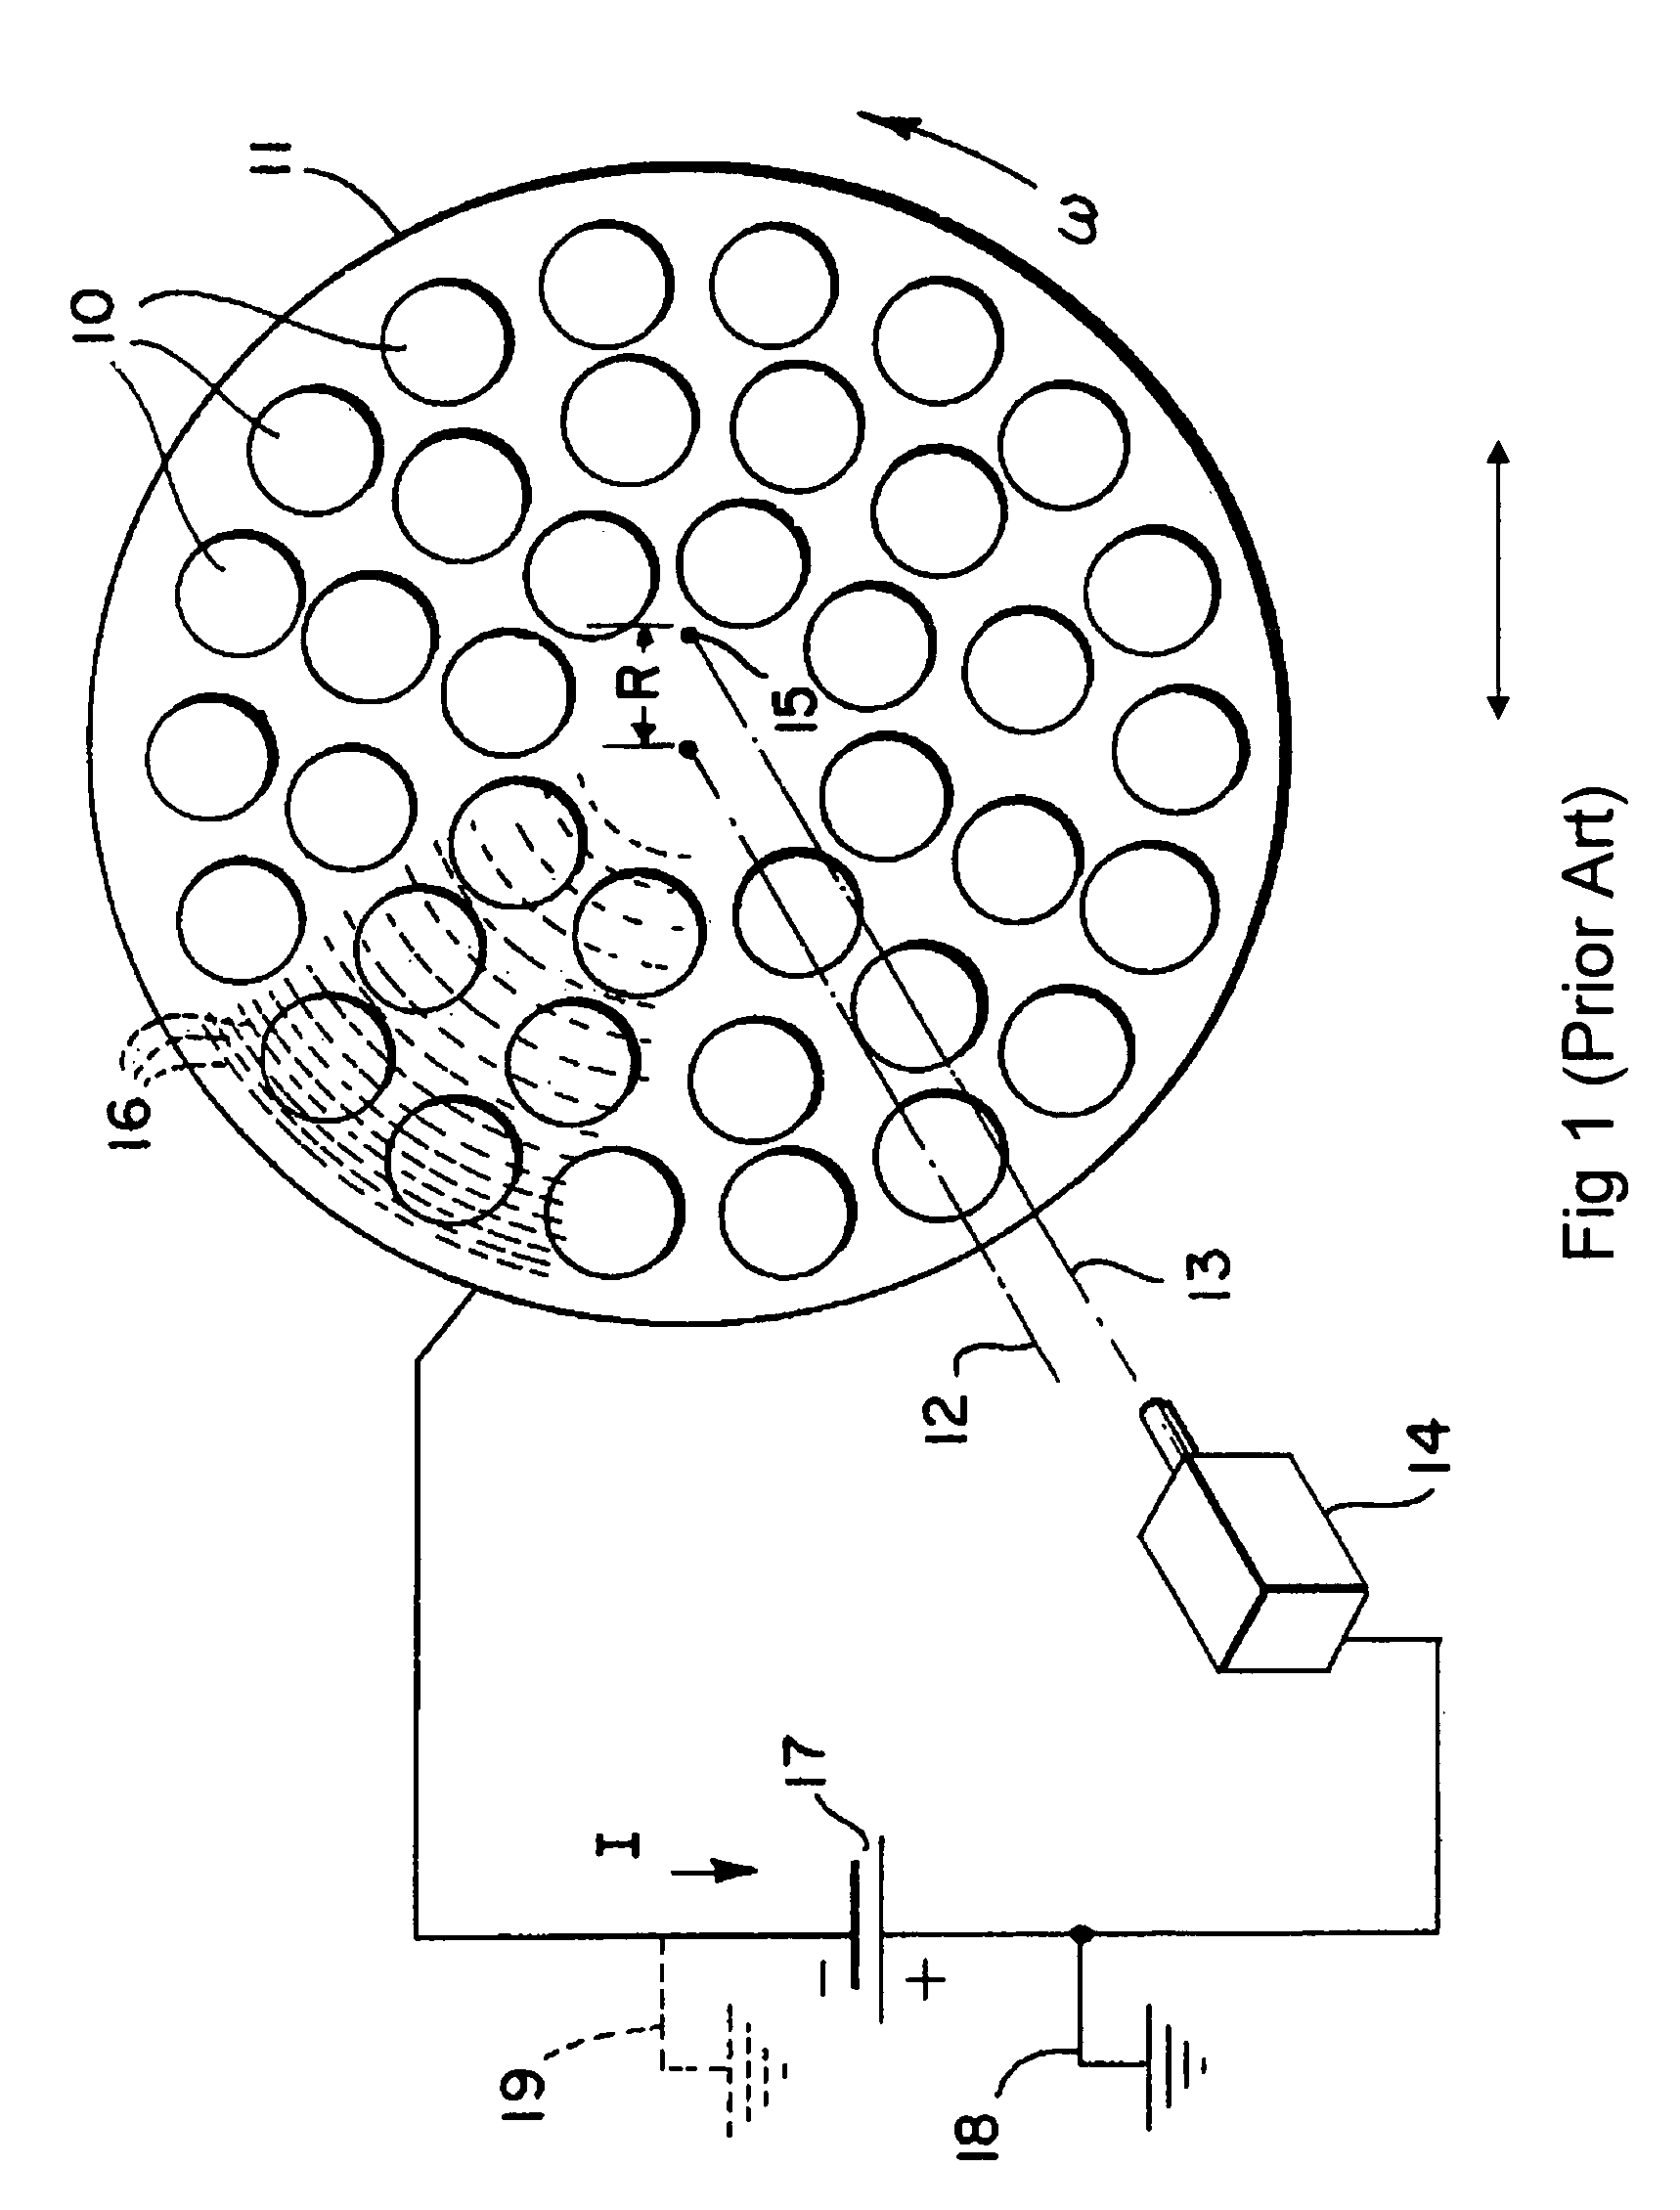 Apparatus and methods for ion beam implantation